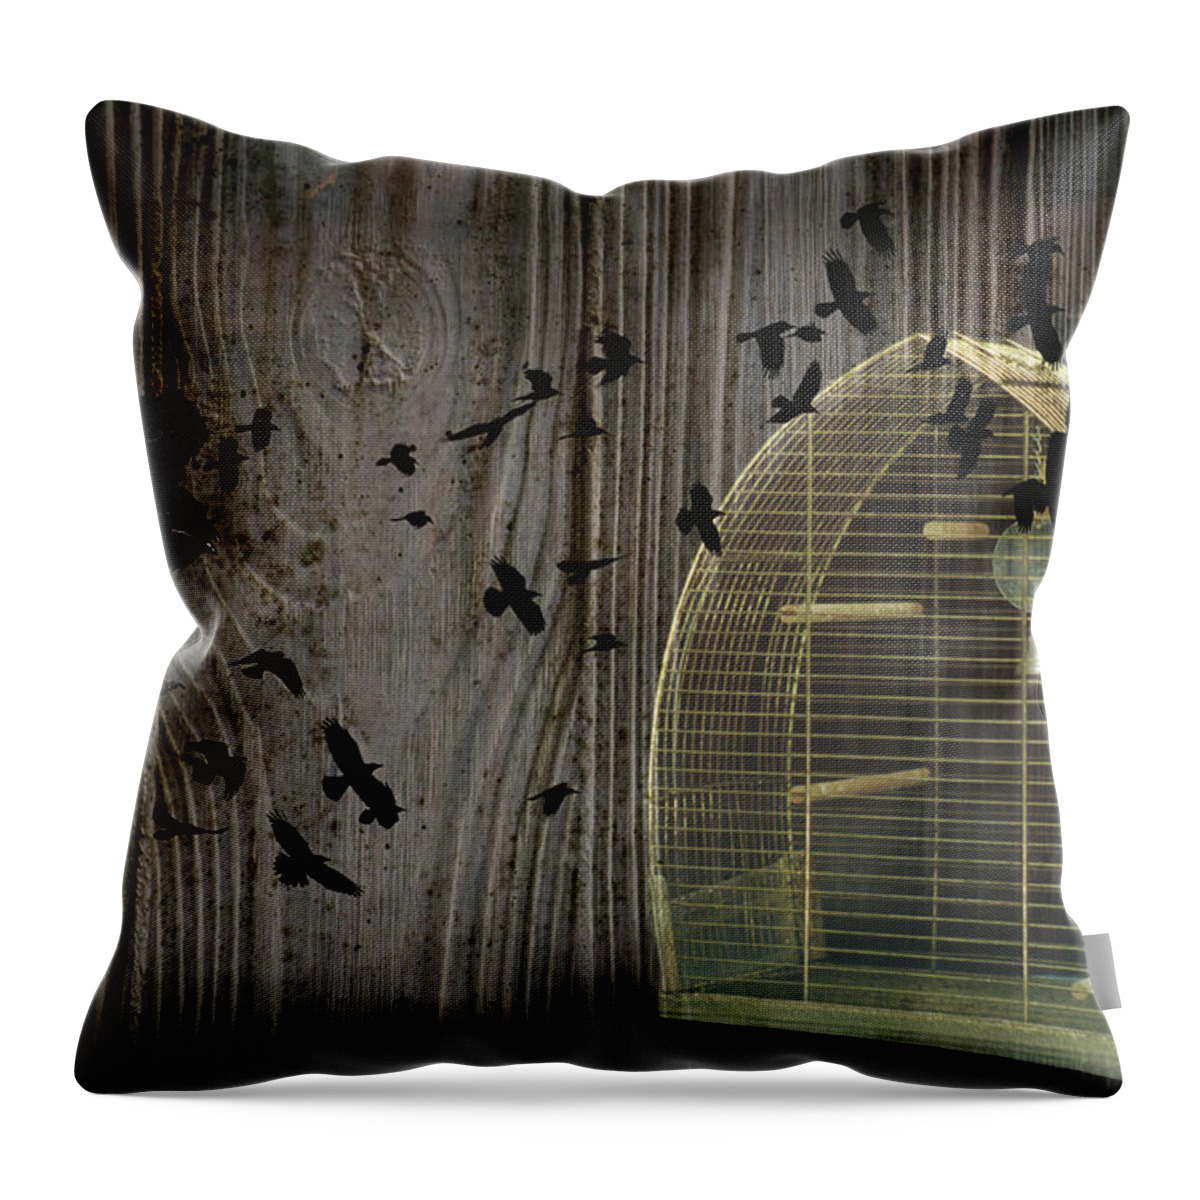 Wild Bird Throw Pillow featuring the photograph Birds Gone Wild by Suzanne Powers